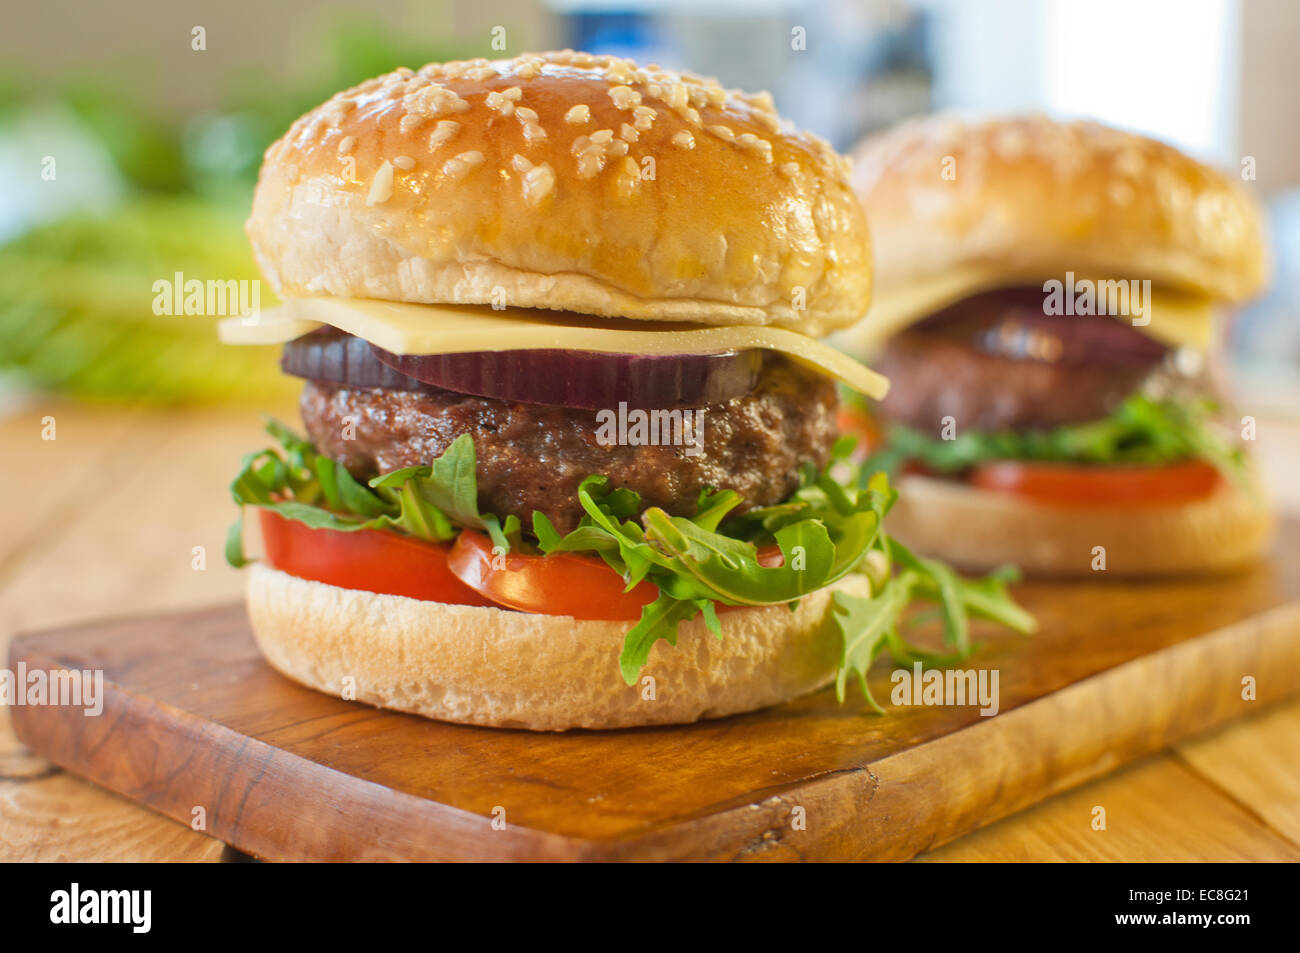 Homemade burgers with cheese, tomato and lettuce filling Stock Photo